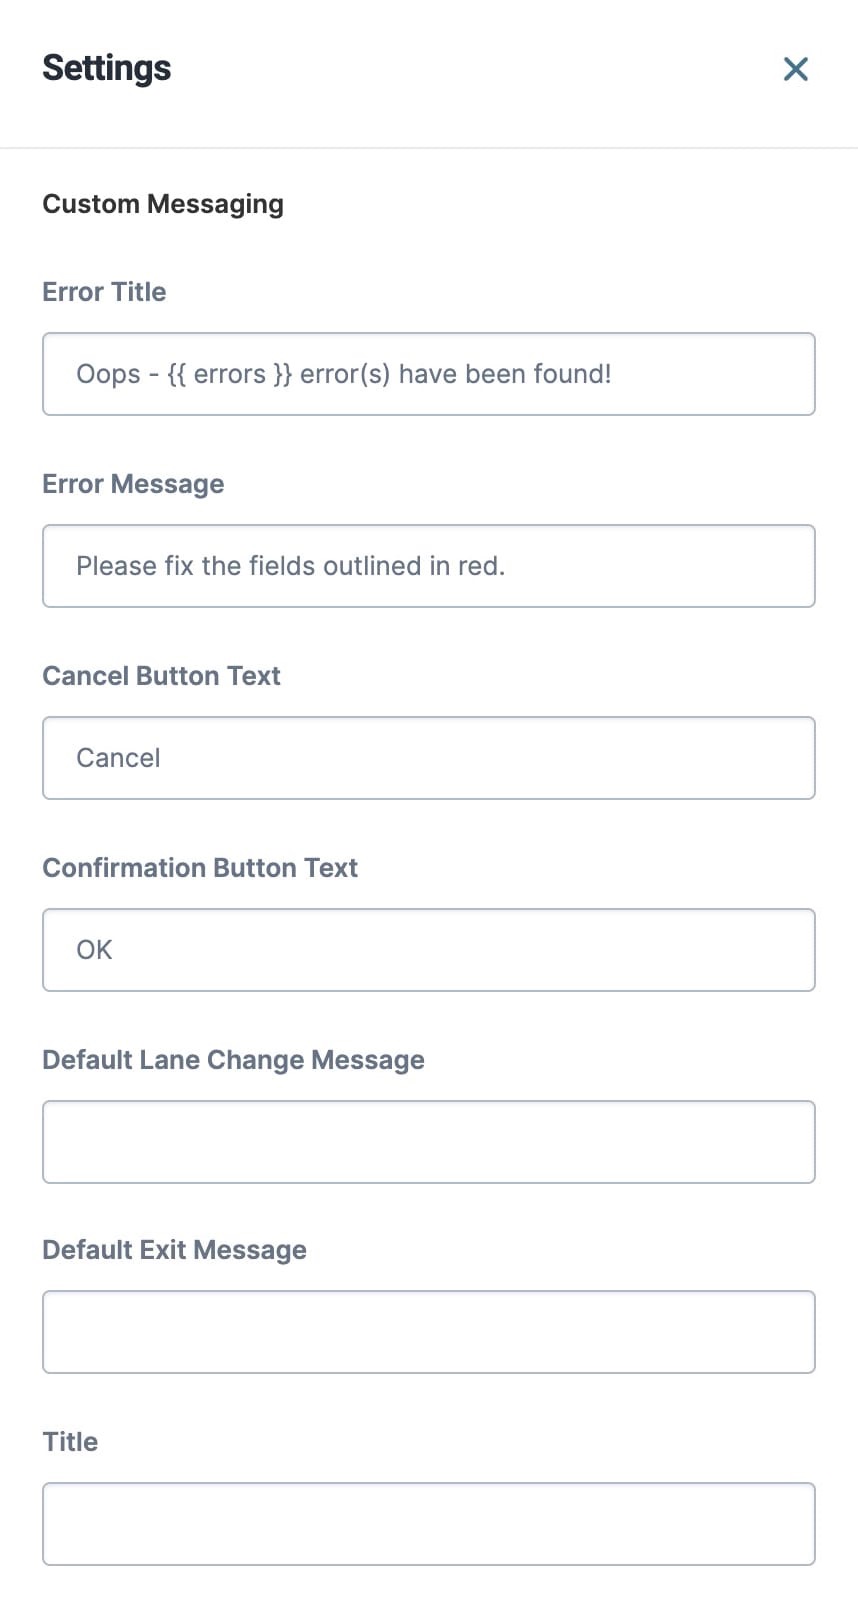 A static image displaying the Custom Messaging section of the Workflow Settings modal.